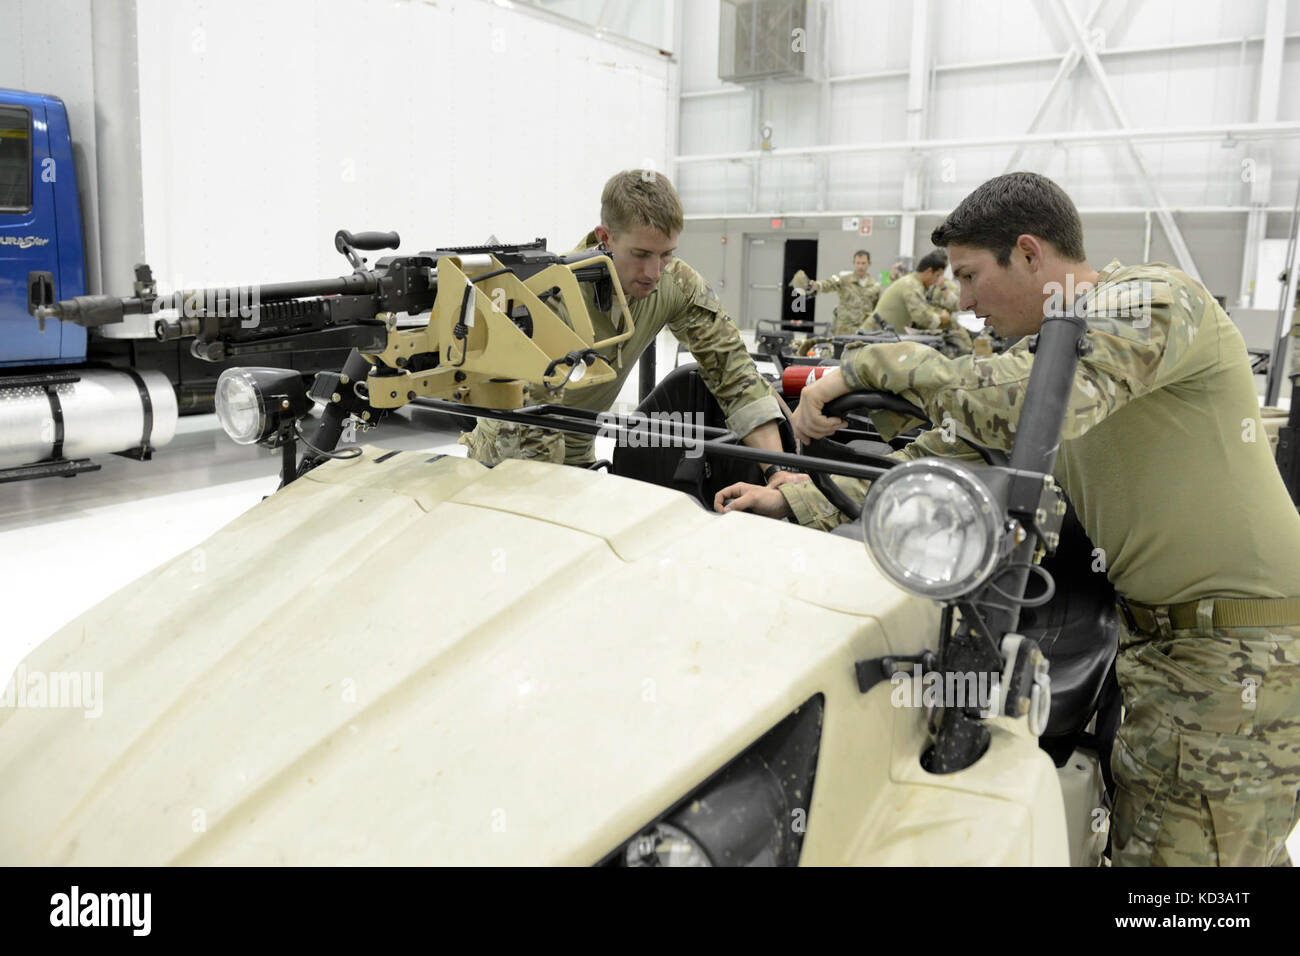 U.S. Air Force Capt. Josh Kitchen, left, assigned to the 169th Fighter Wing, is shown a Lightweight All Terrain Vehicle by a U.S. Army Special Forces Soldier at McEntire Joint National Guard Base, S.C., May 20, 2014.  Elements of the South Carolina Army and Air National Guard, U.S. Army and U.S. Air Force special operations, and Columbia Police Department S.W.A.T., conduct urban assault training, which allowed special operations forces and National Guard assets to work alongside each other while training in an urban environment.  (U.S. Air National Guard photo by Tech. Sgt. Jorge Intriago/Rele Stock Photo